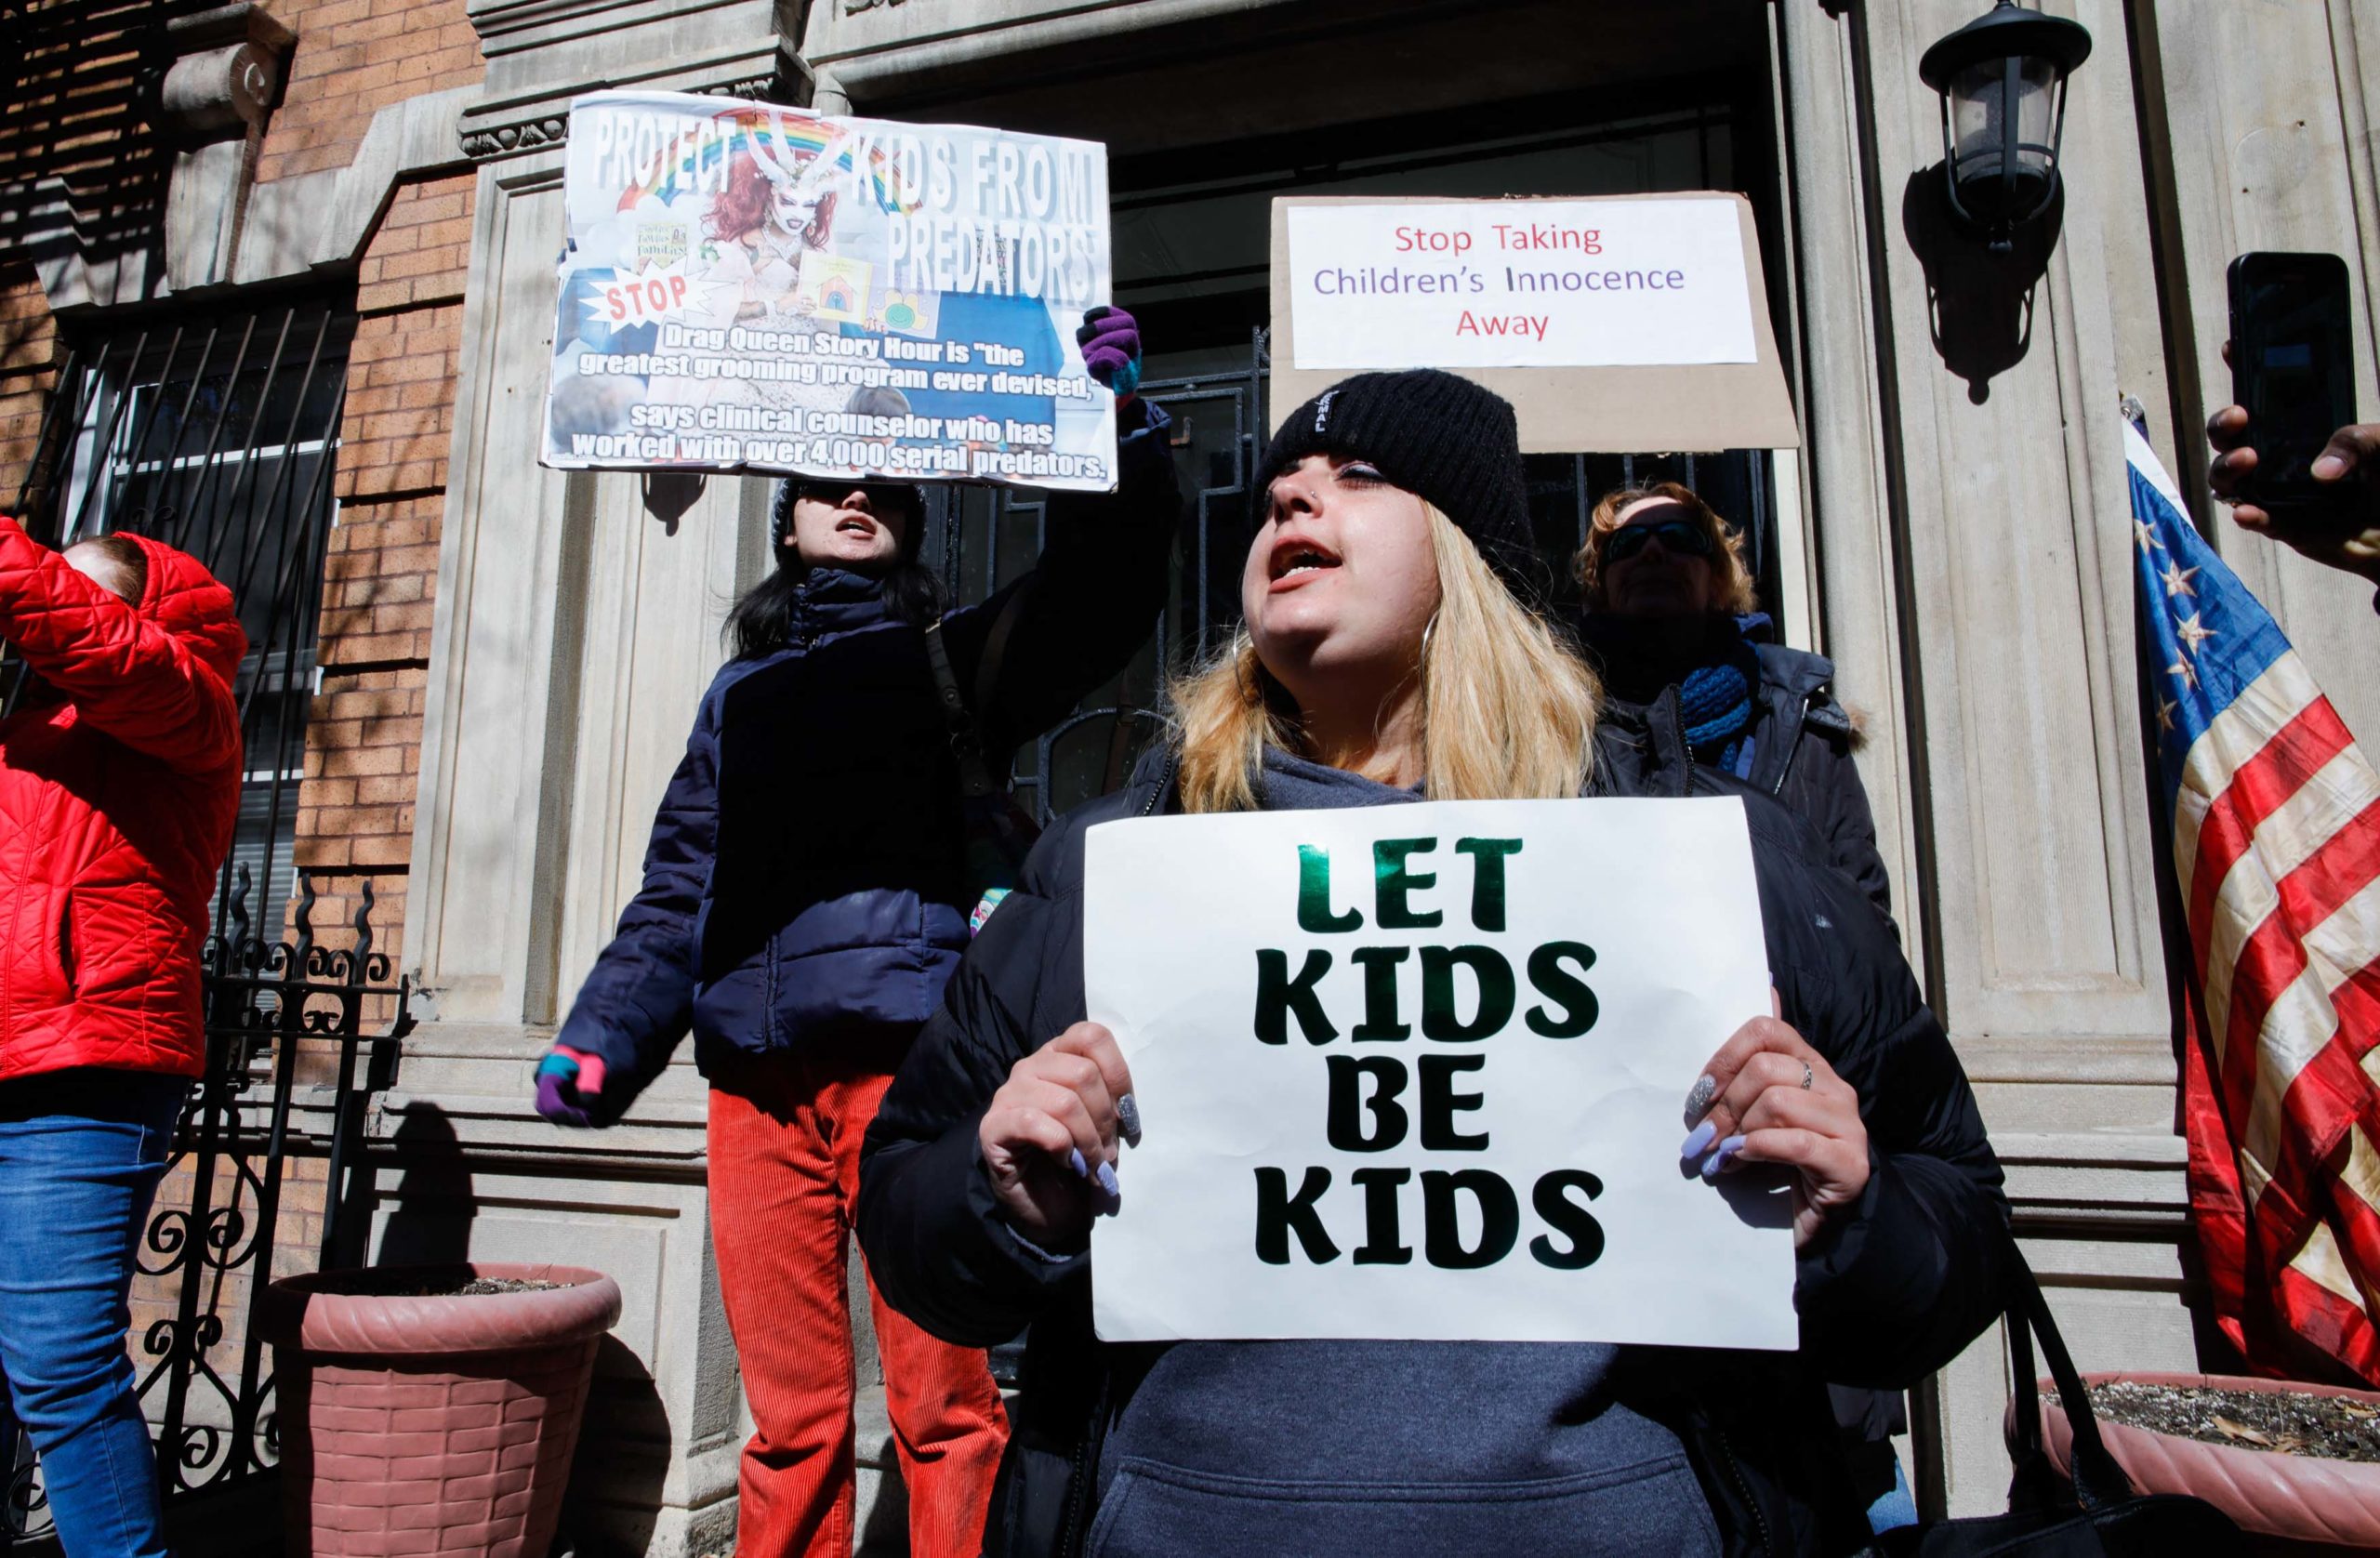 A woman holds a sign reading "Let Kids Be Kids" as she protests across supporters of Drag Story Hour outside the LGBTQ center in New York City on March 19, 2023. (Photo by KENA BETANCUR / AFP) (Photo by KENA BETANCUR/AFP via Getty Images)